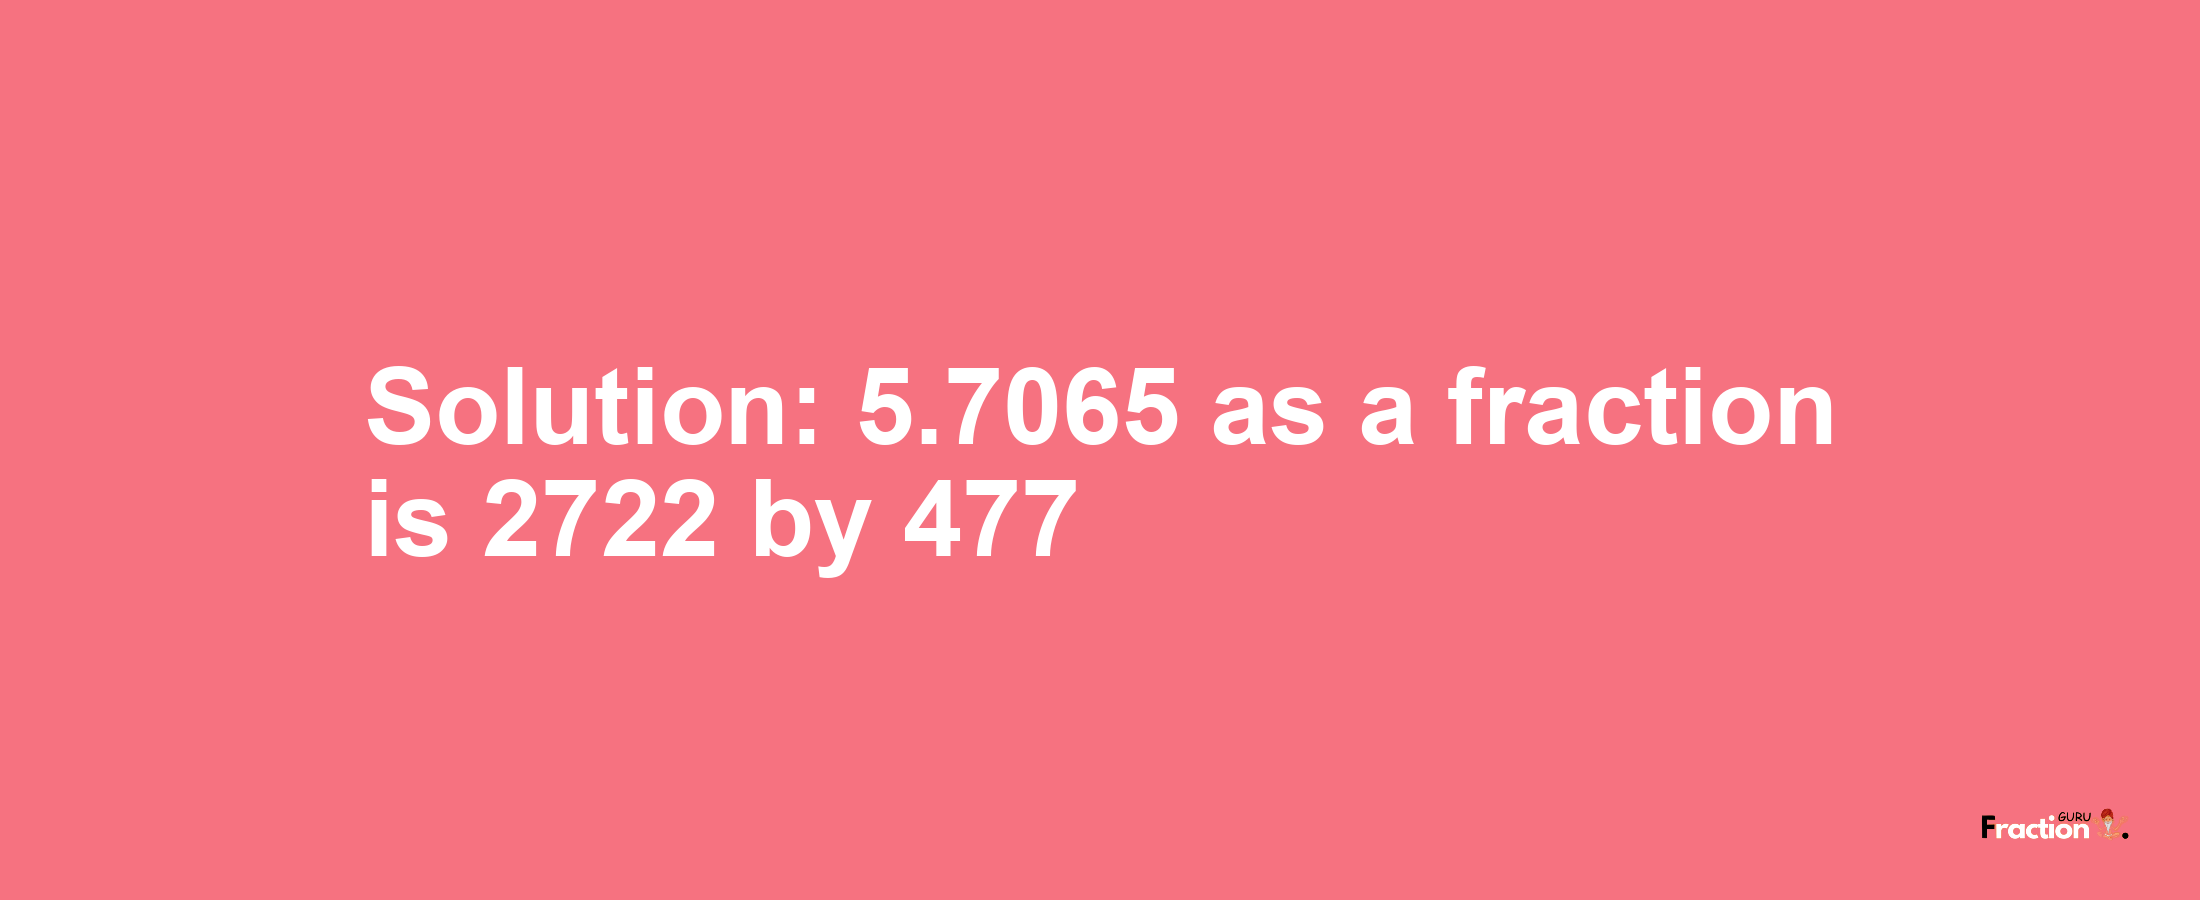 Solution:5.7065 as a fraction is 2722/477